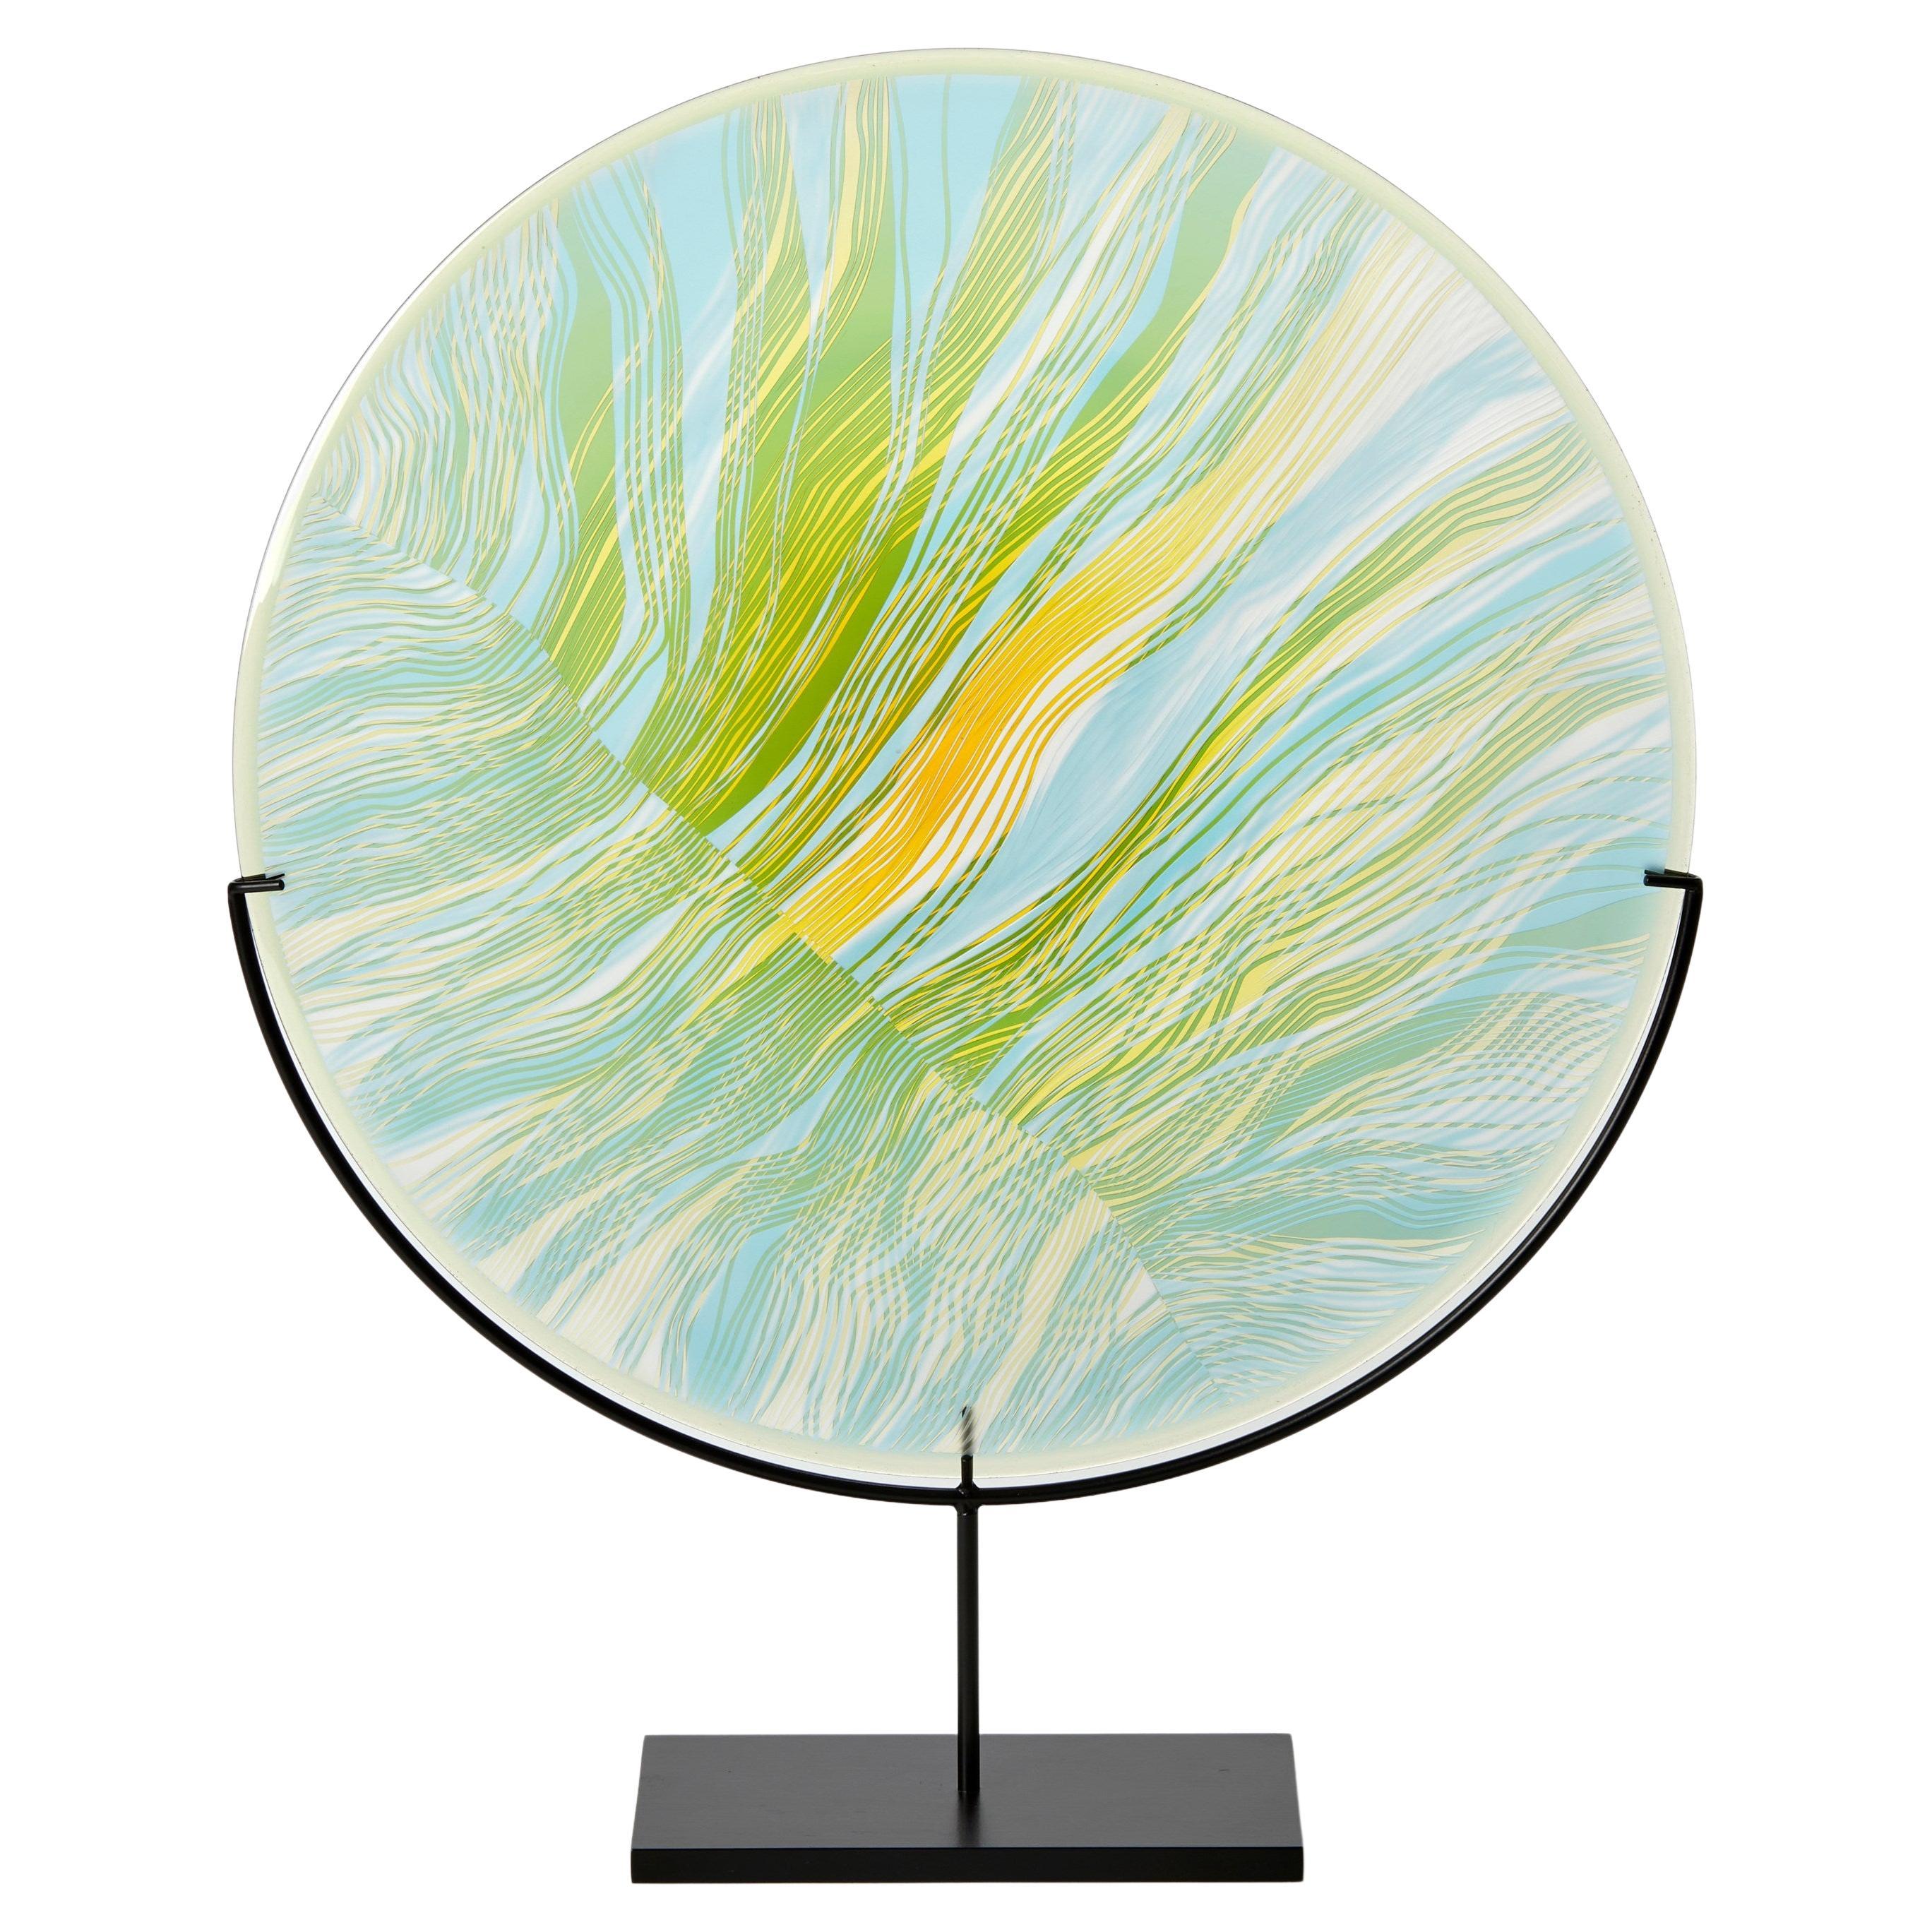 Solar Storm Sky Blue over Gold, a contemporary cut glass artwork by Kate Jones For Sale